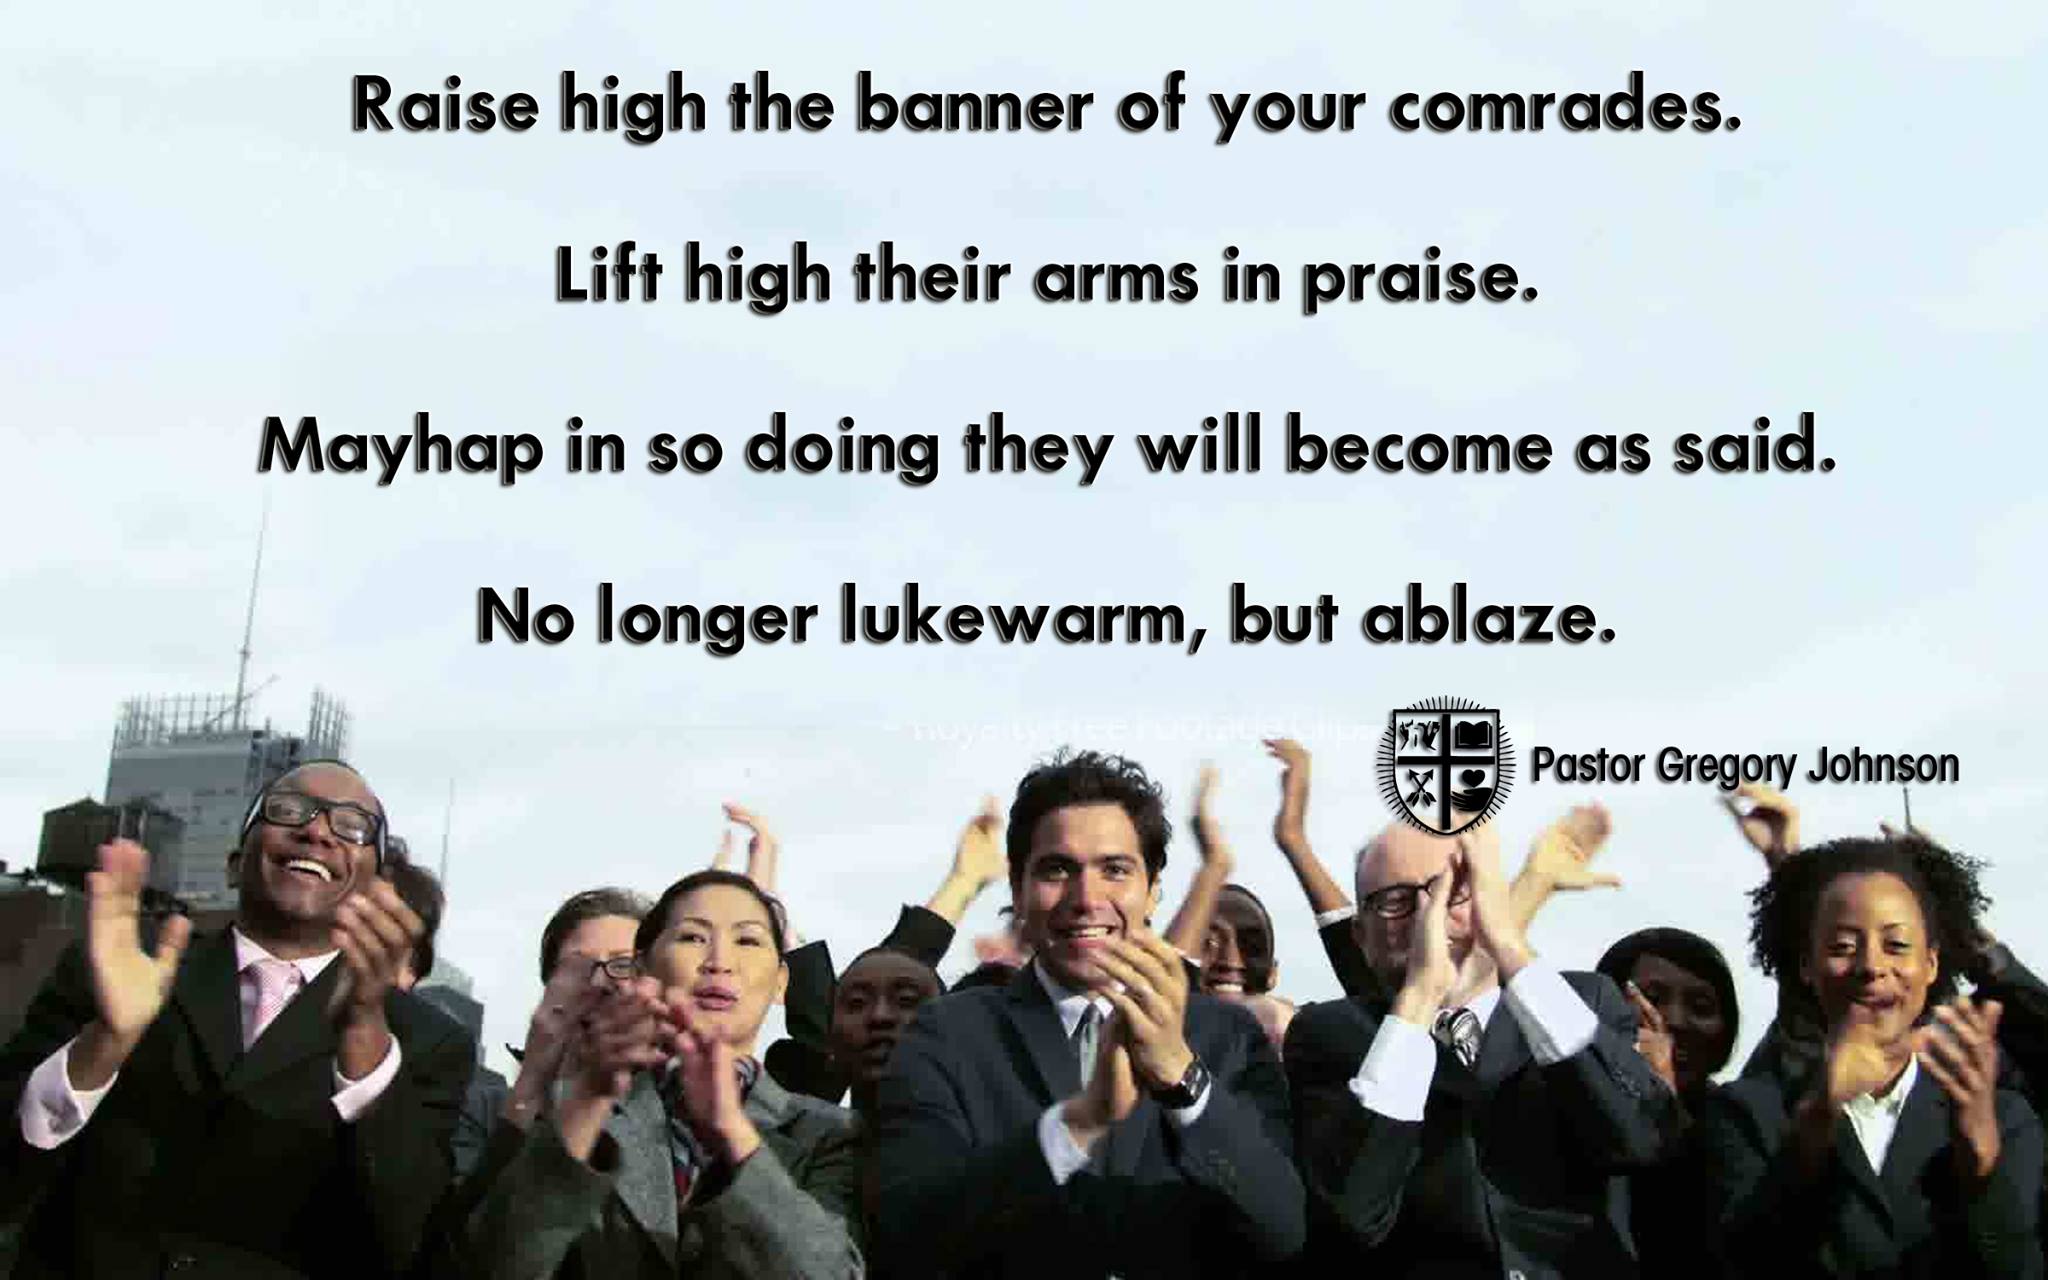 Raise high the banner of your comrades…